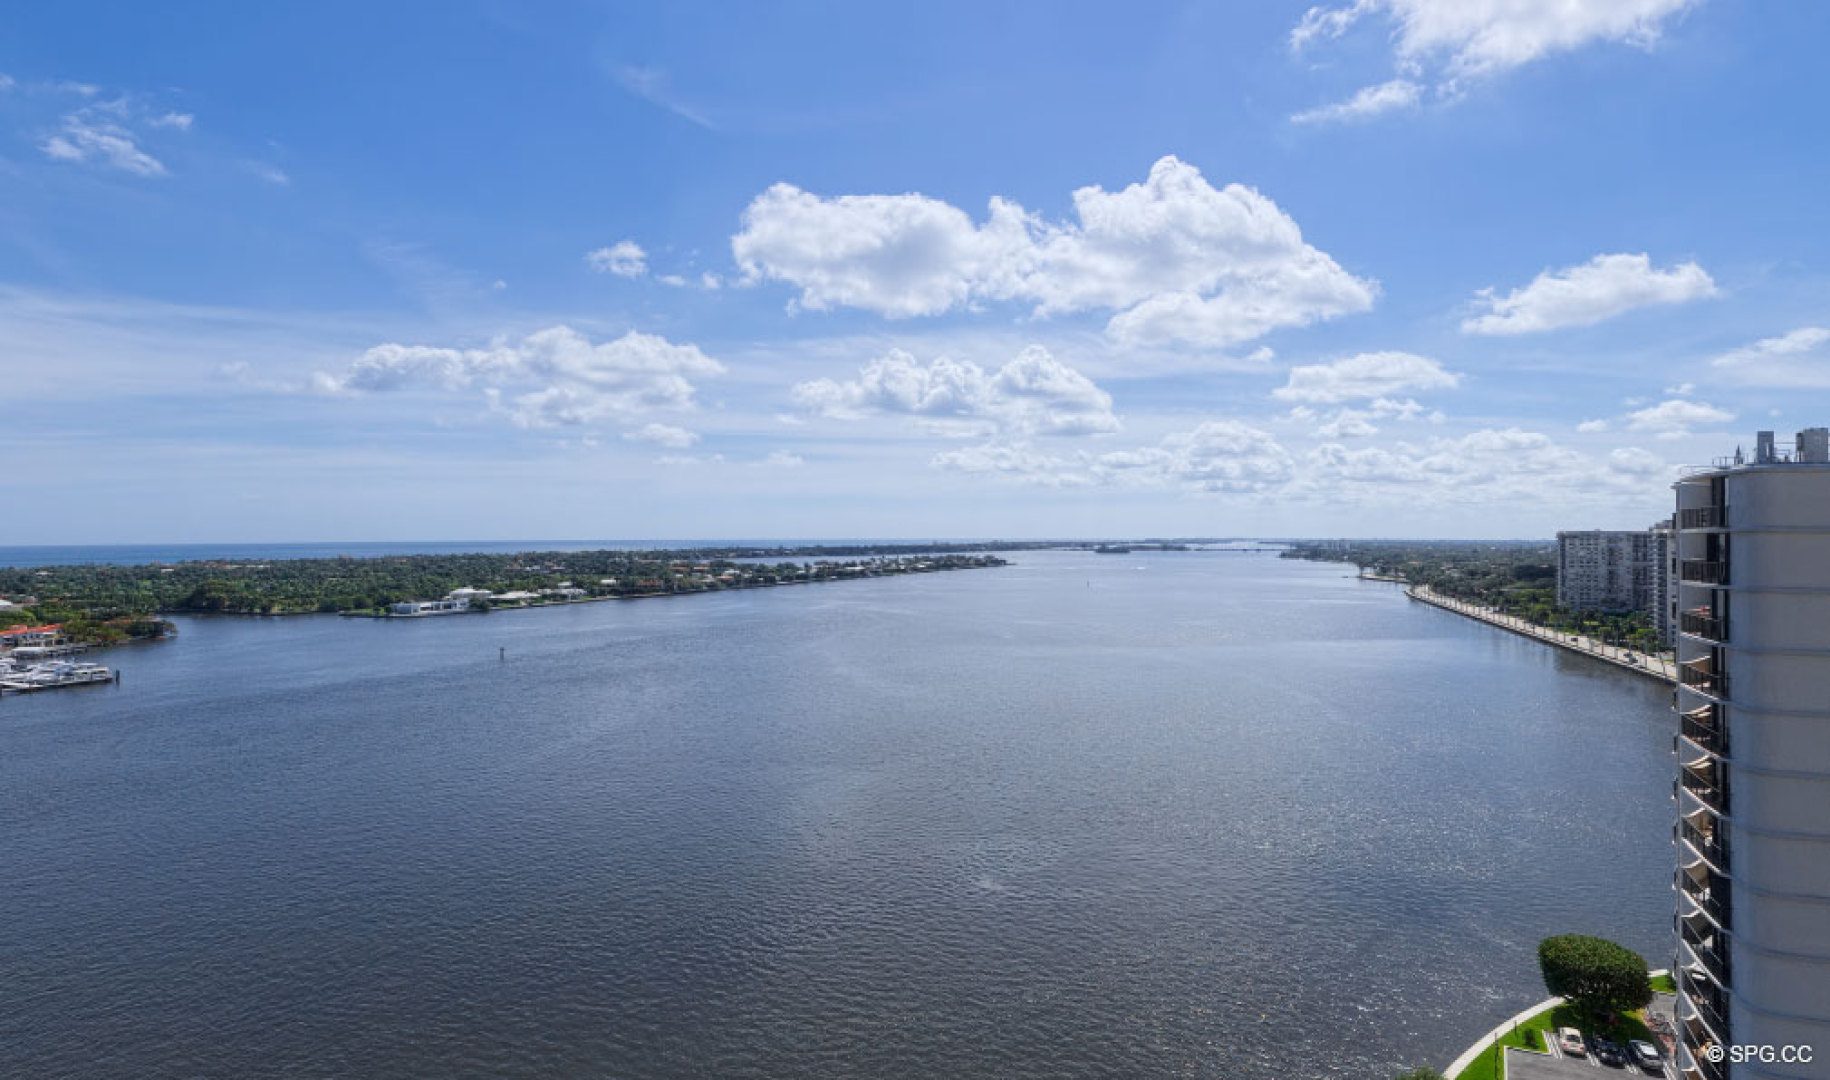 Southern Views from The Bristol, Luxury Waterfront Condos in West Palm Beach, Florida 33401